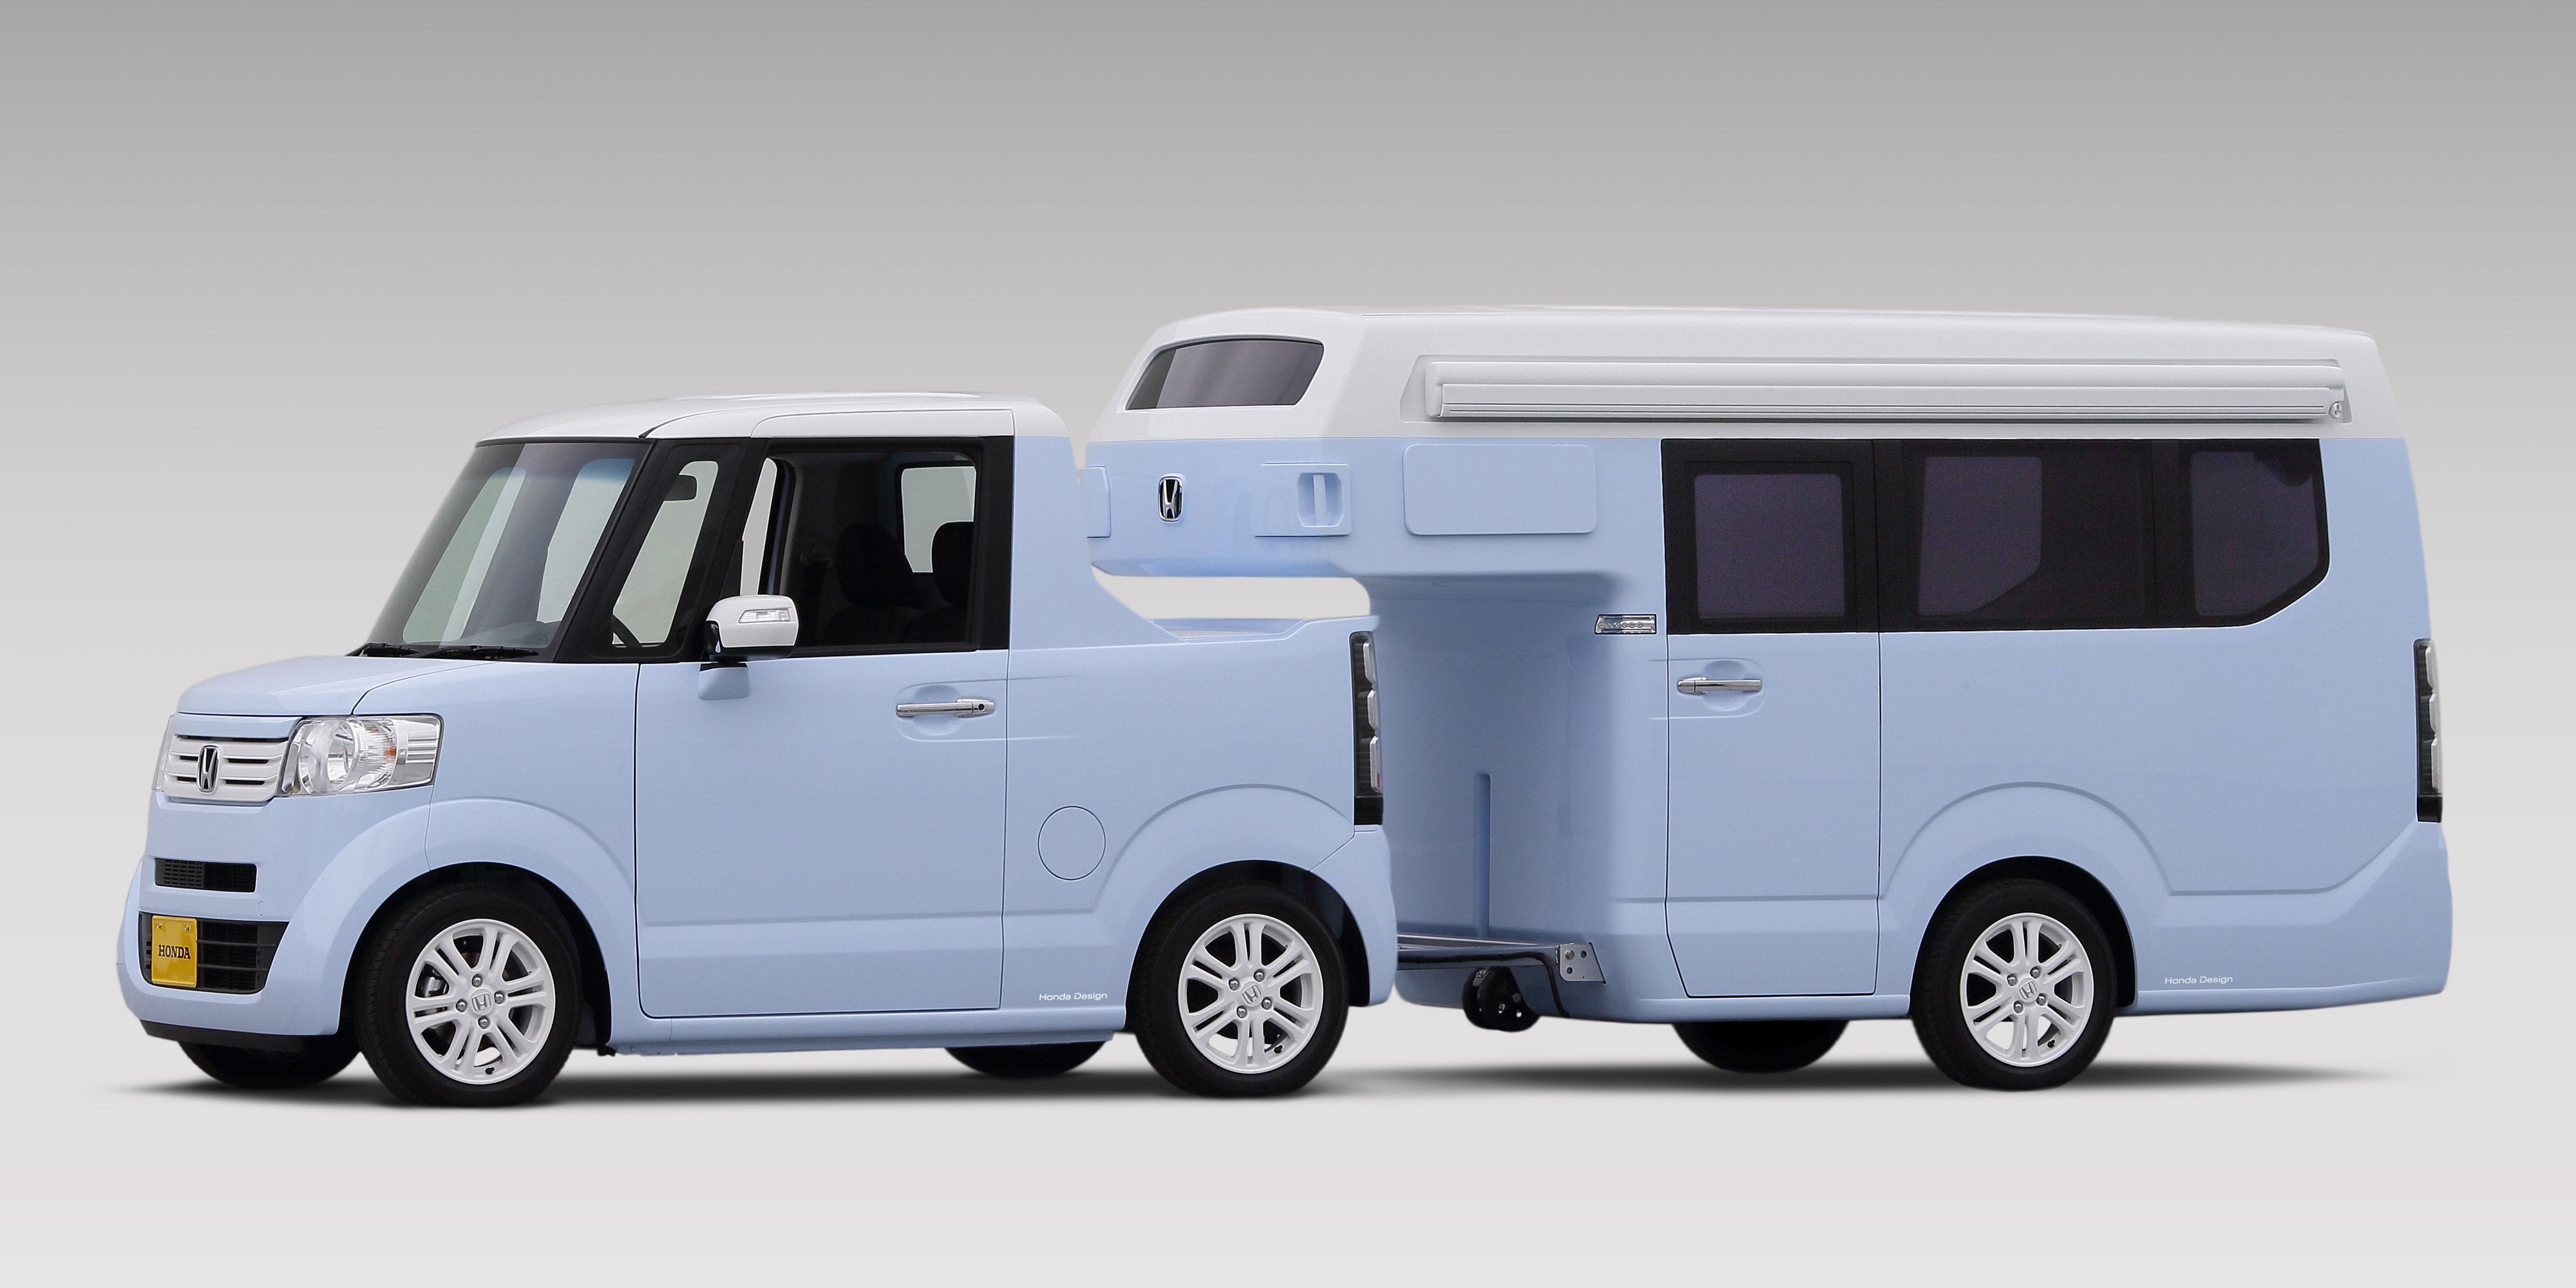 Honda Built A Micro Truck Camper Combo And It S Amazing